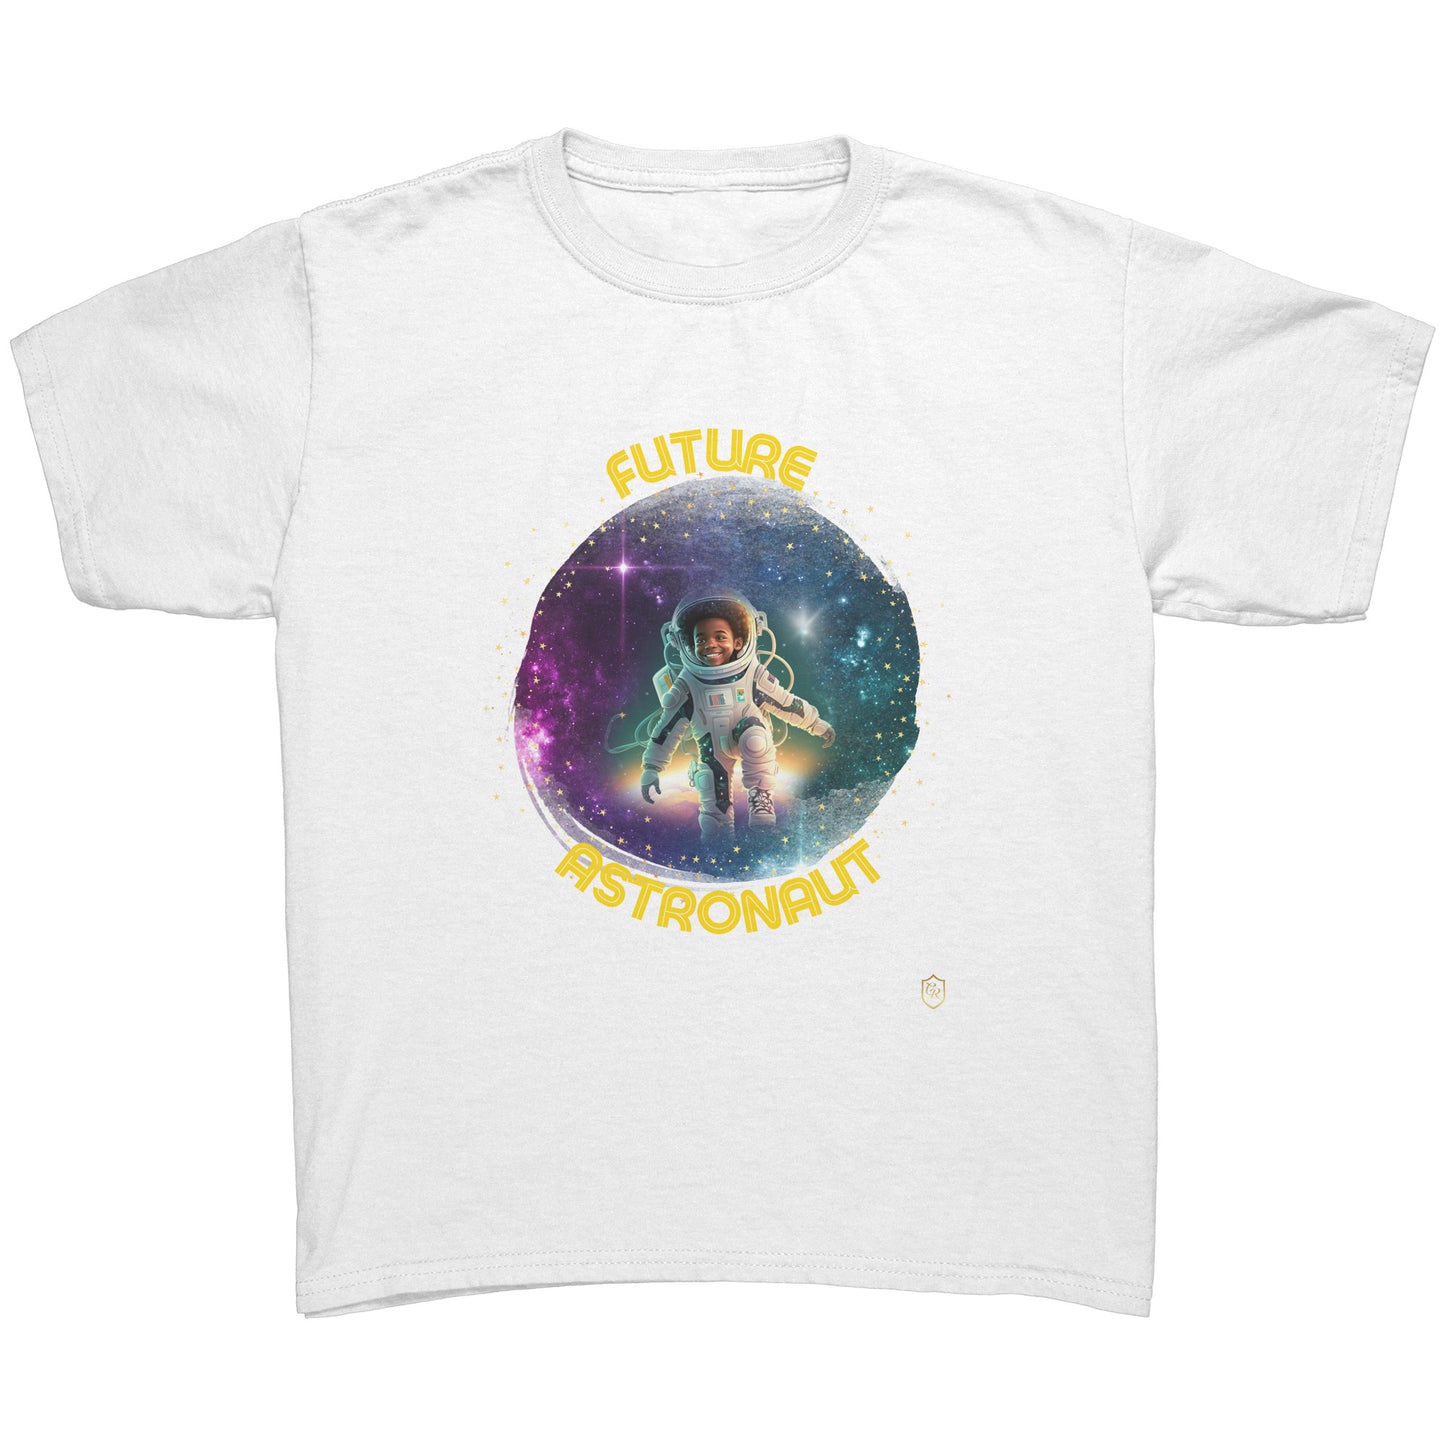 Young Boy's Galactic Explorer T-shirt: The Official Astronaut Gear of the Future